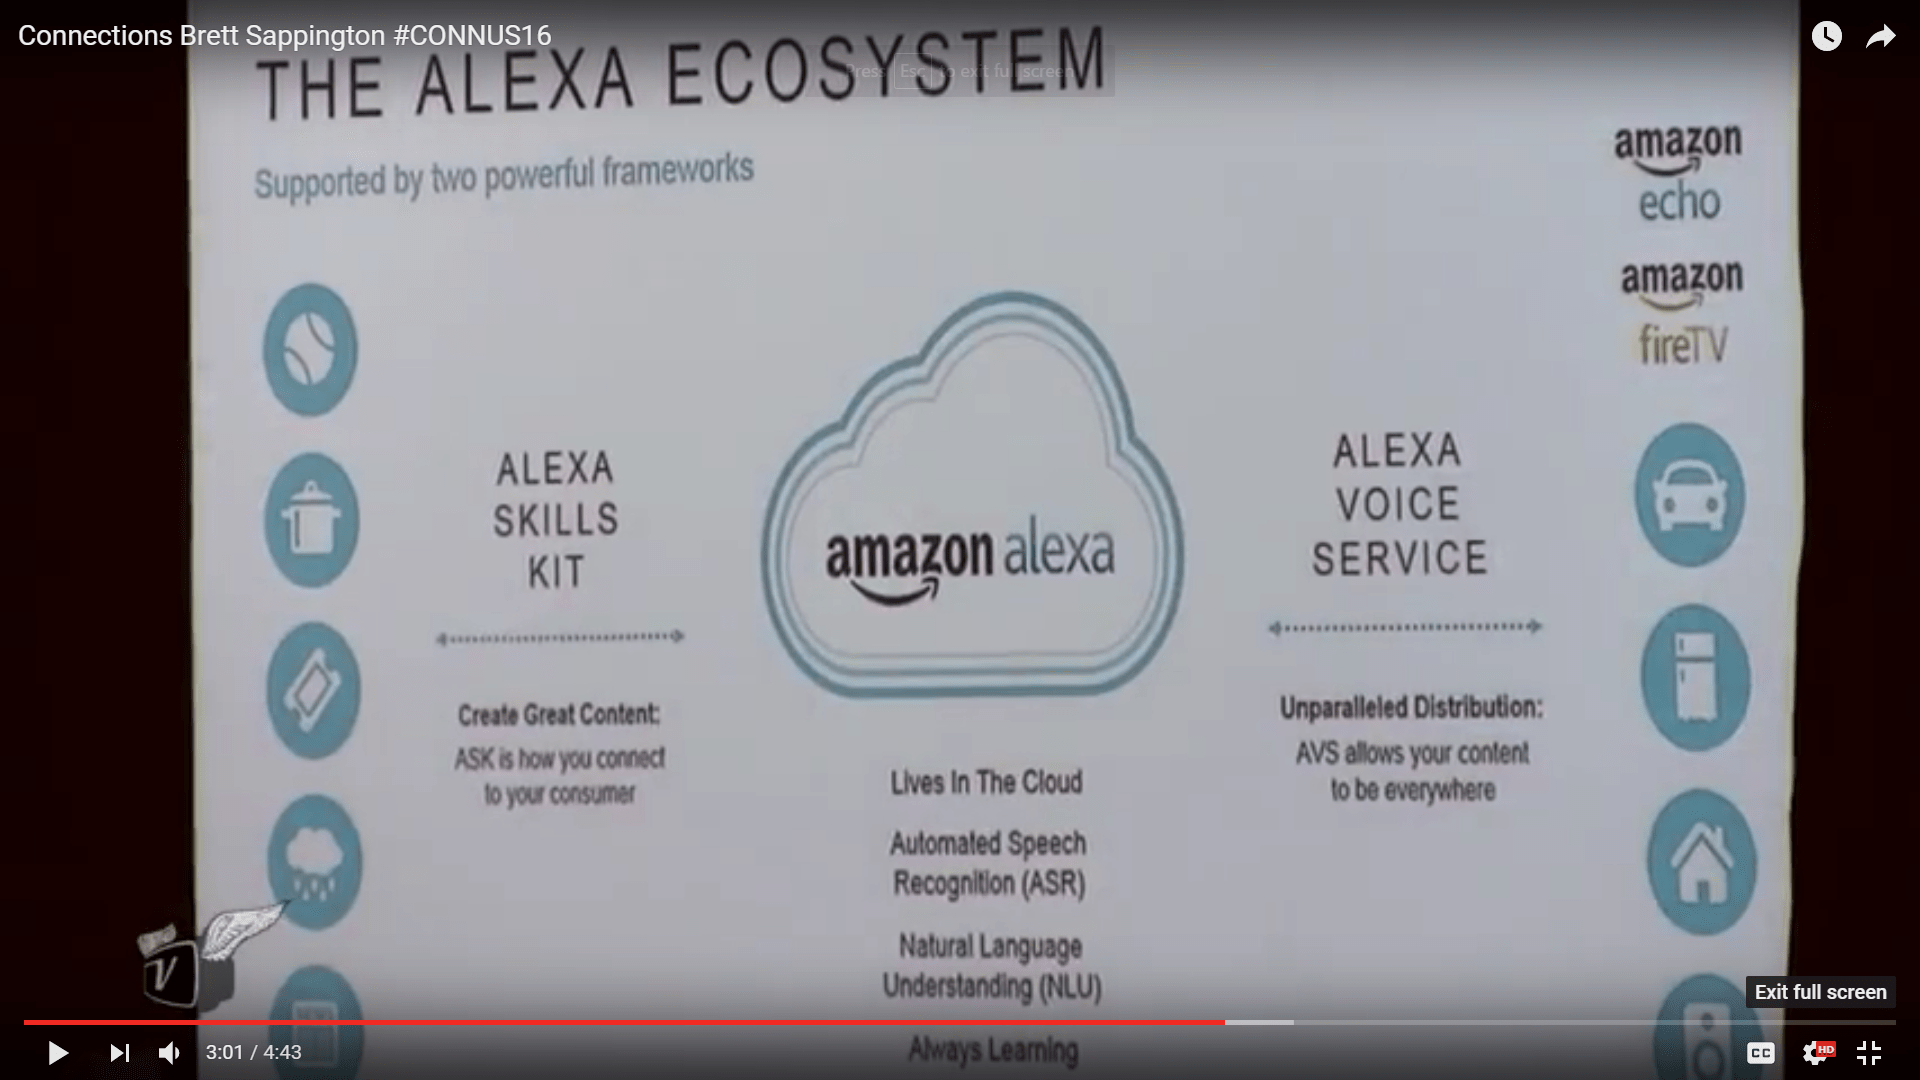 The Alexa ecosystem, which Brett Sappington discusses in the associated interview.